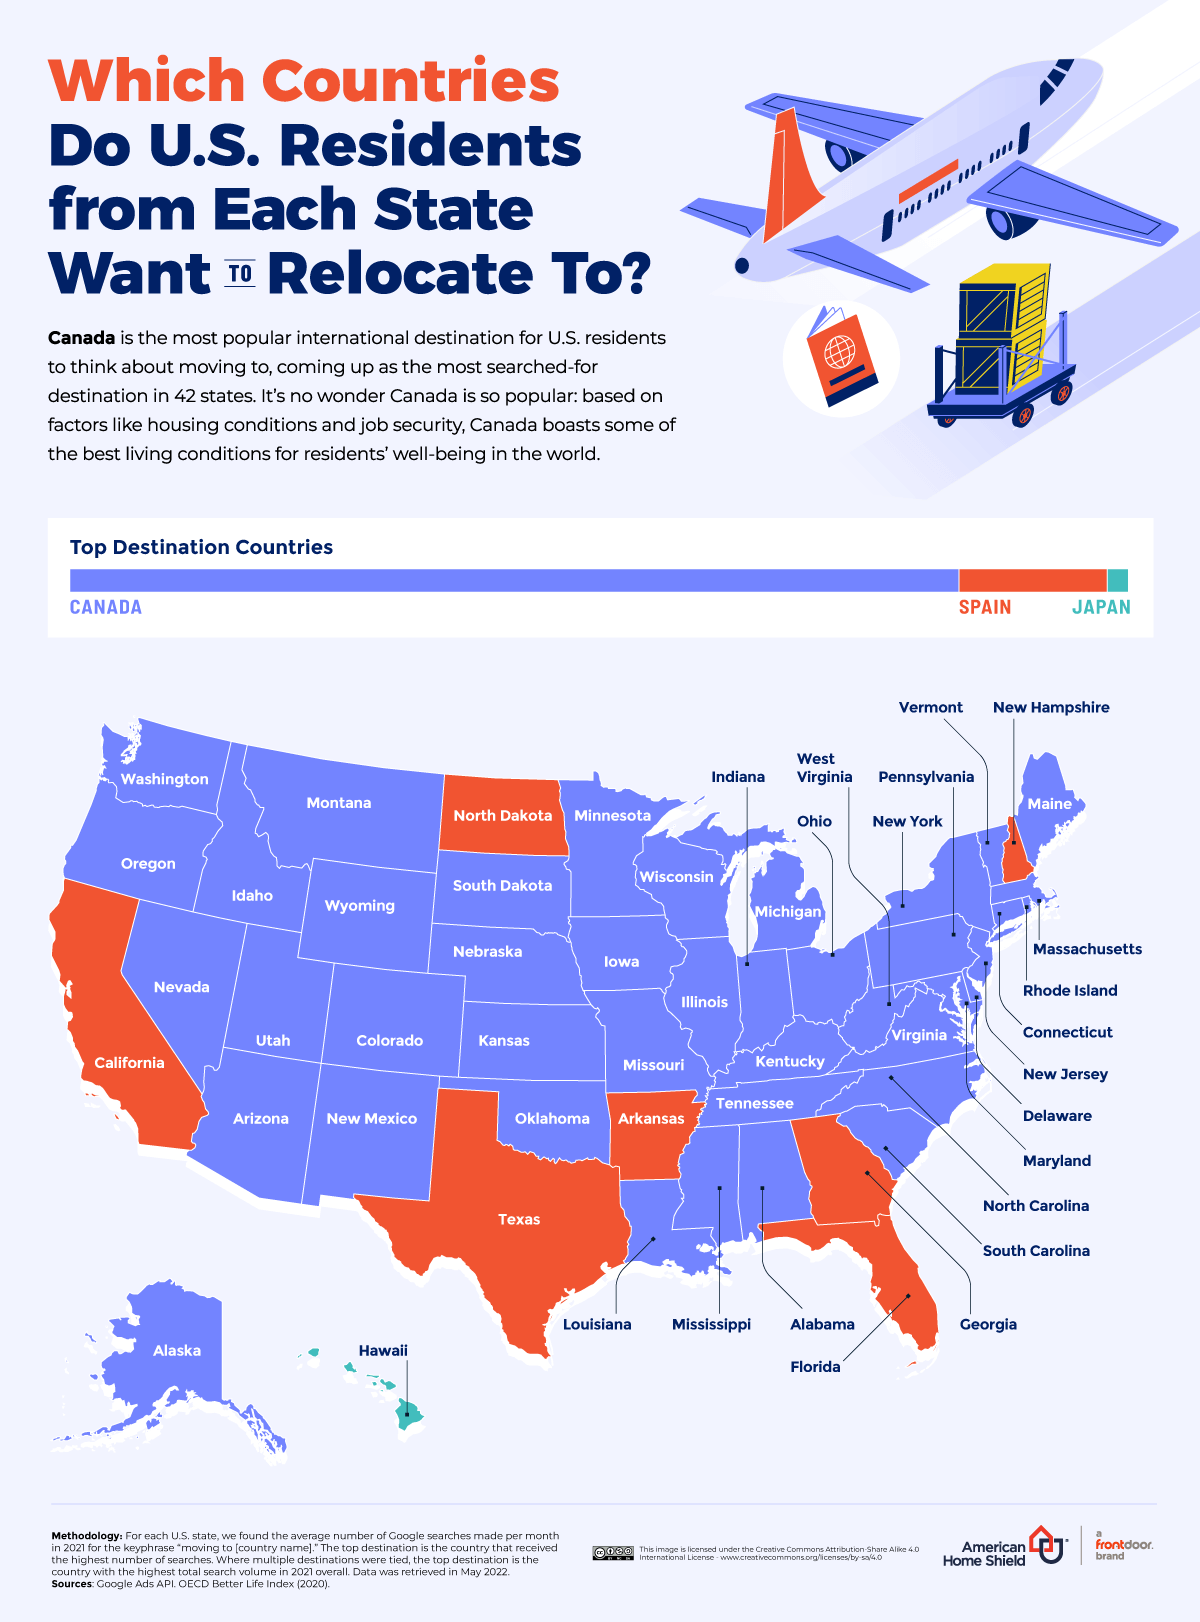 03_Where-Do-US-Residents-Want-to-Relocate-To_Internationally_US-Map.png